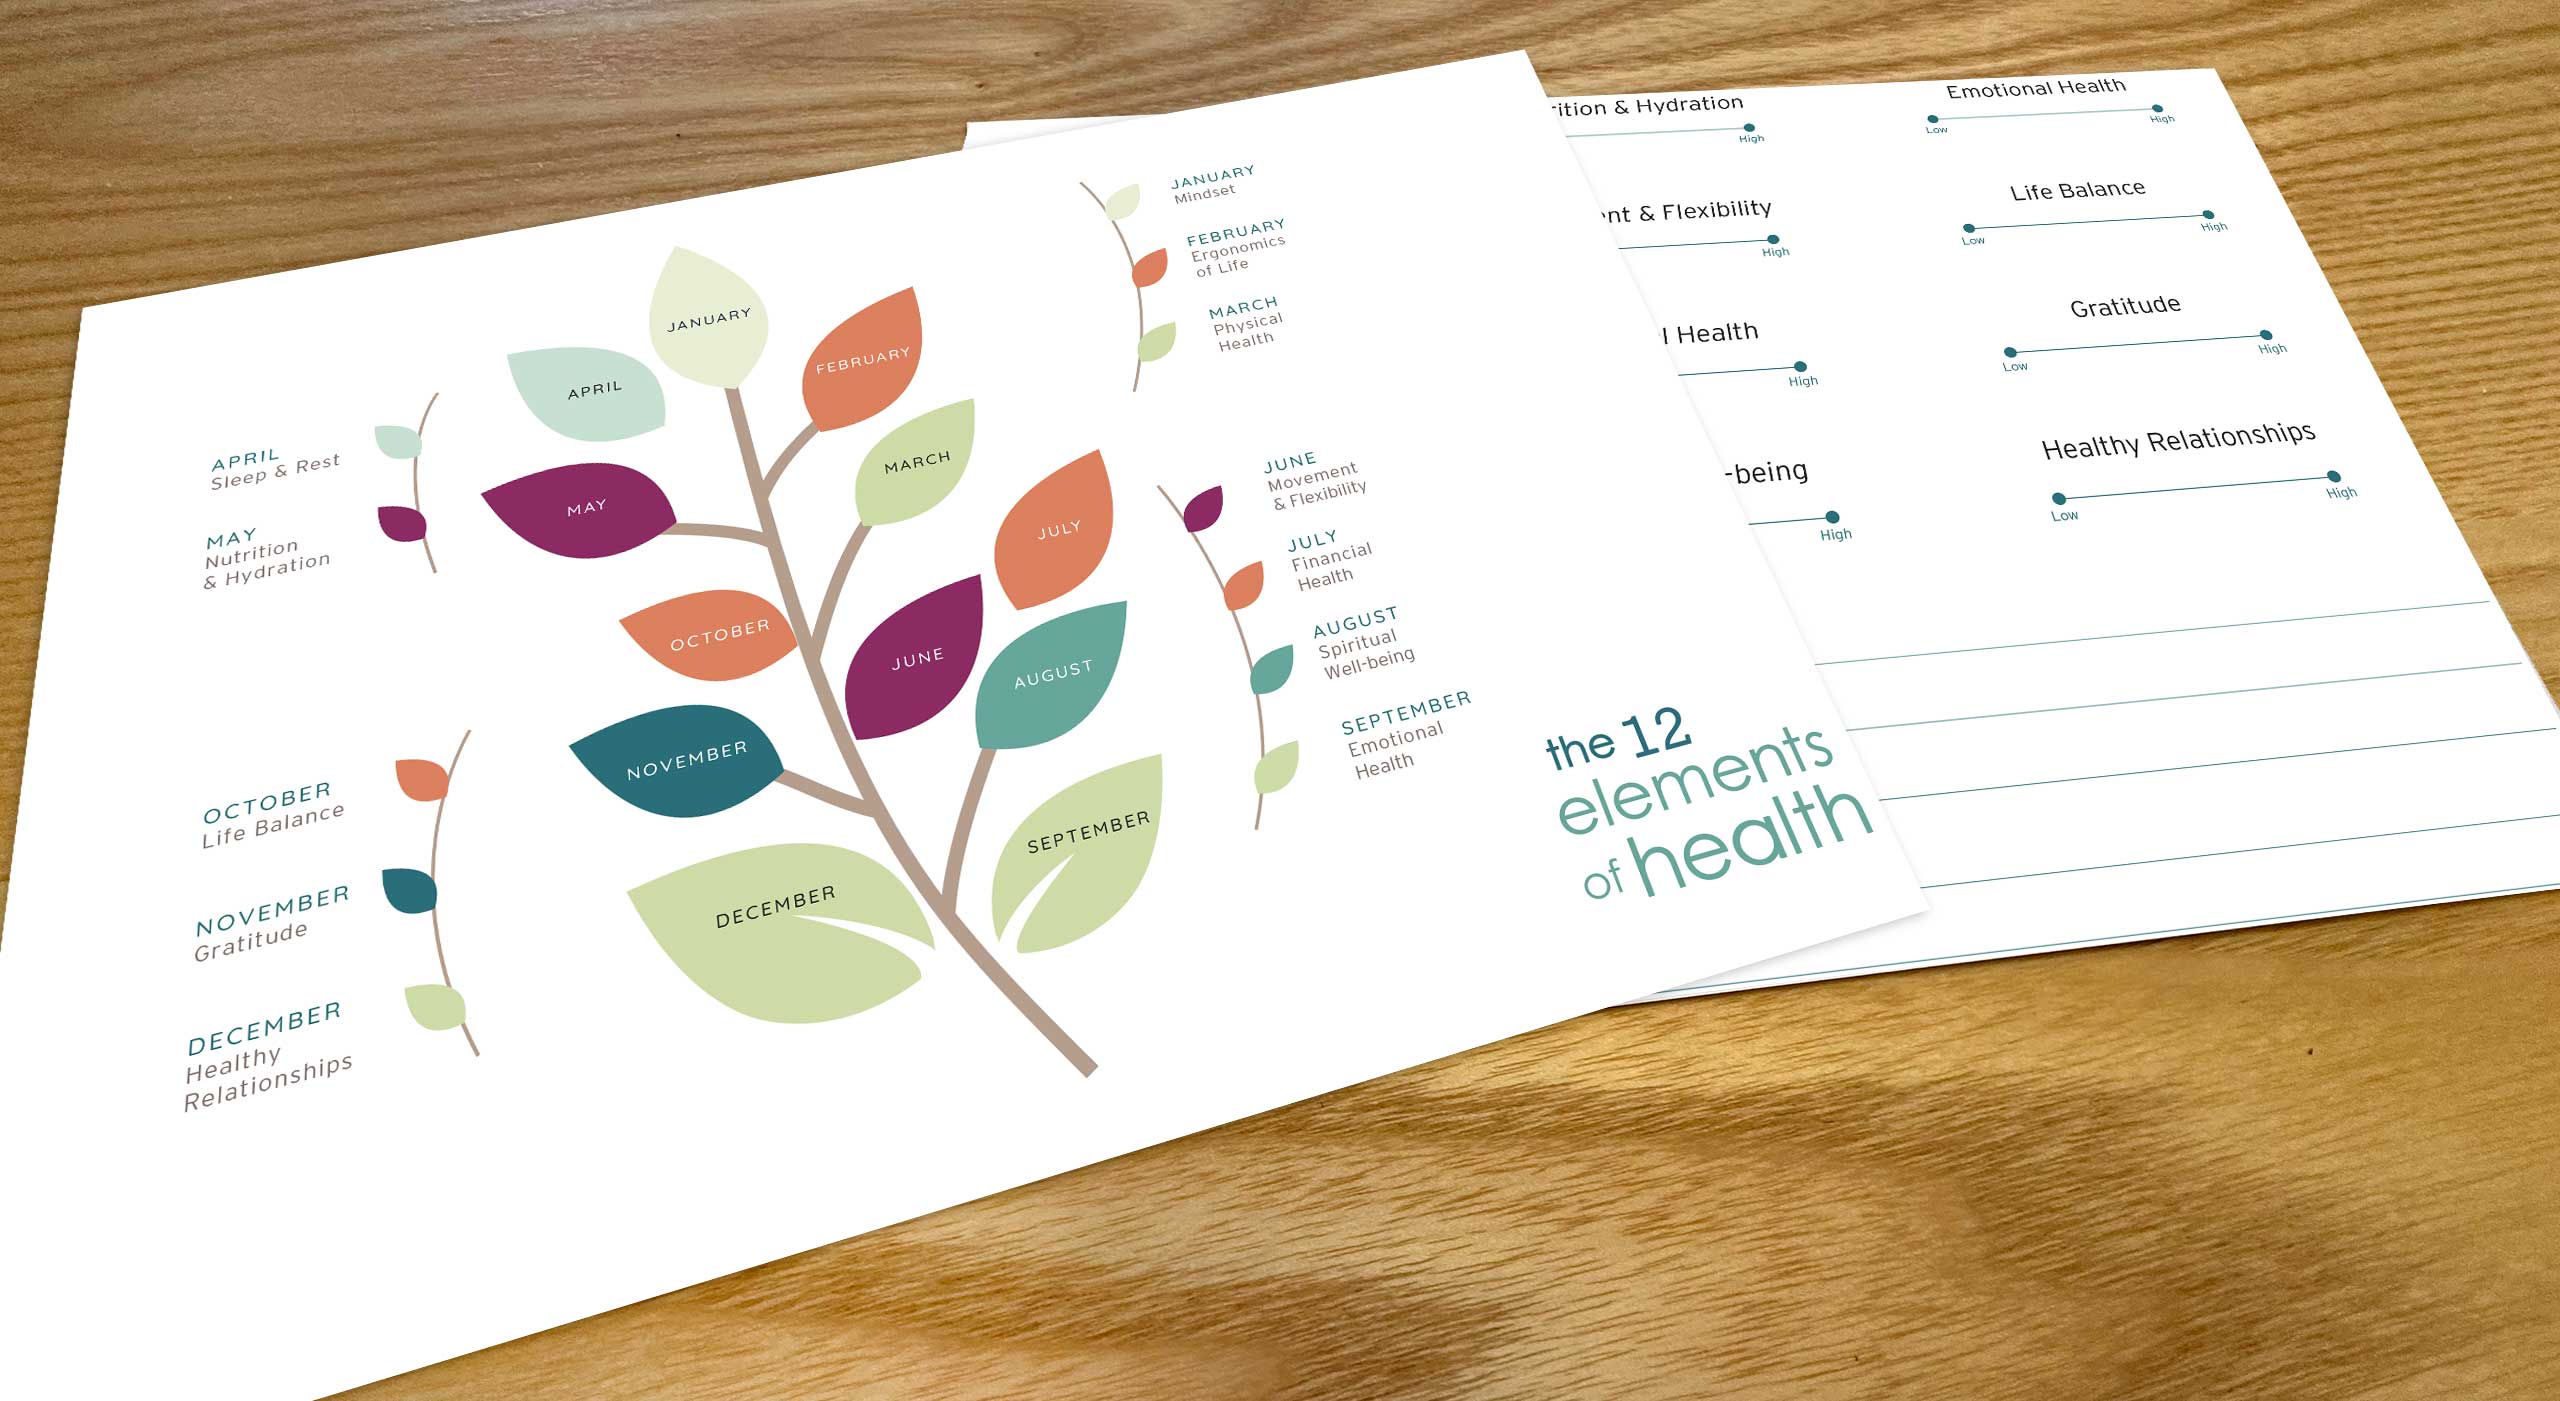 example of a postcard design for advanced health of Naperville 12 elements of health campaign